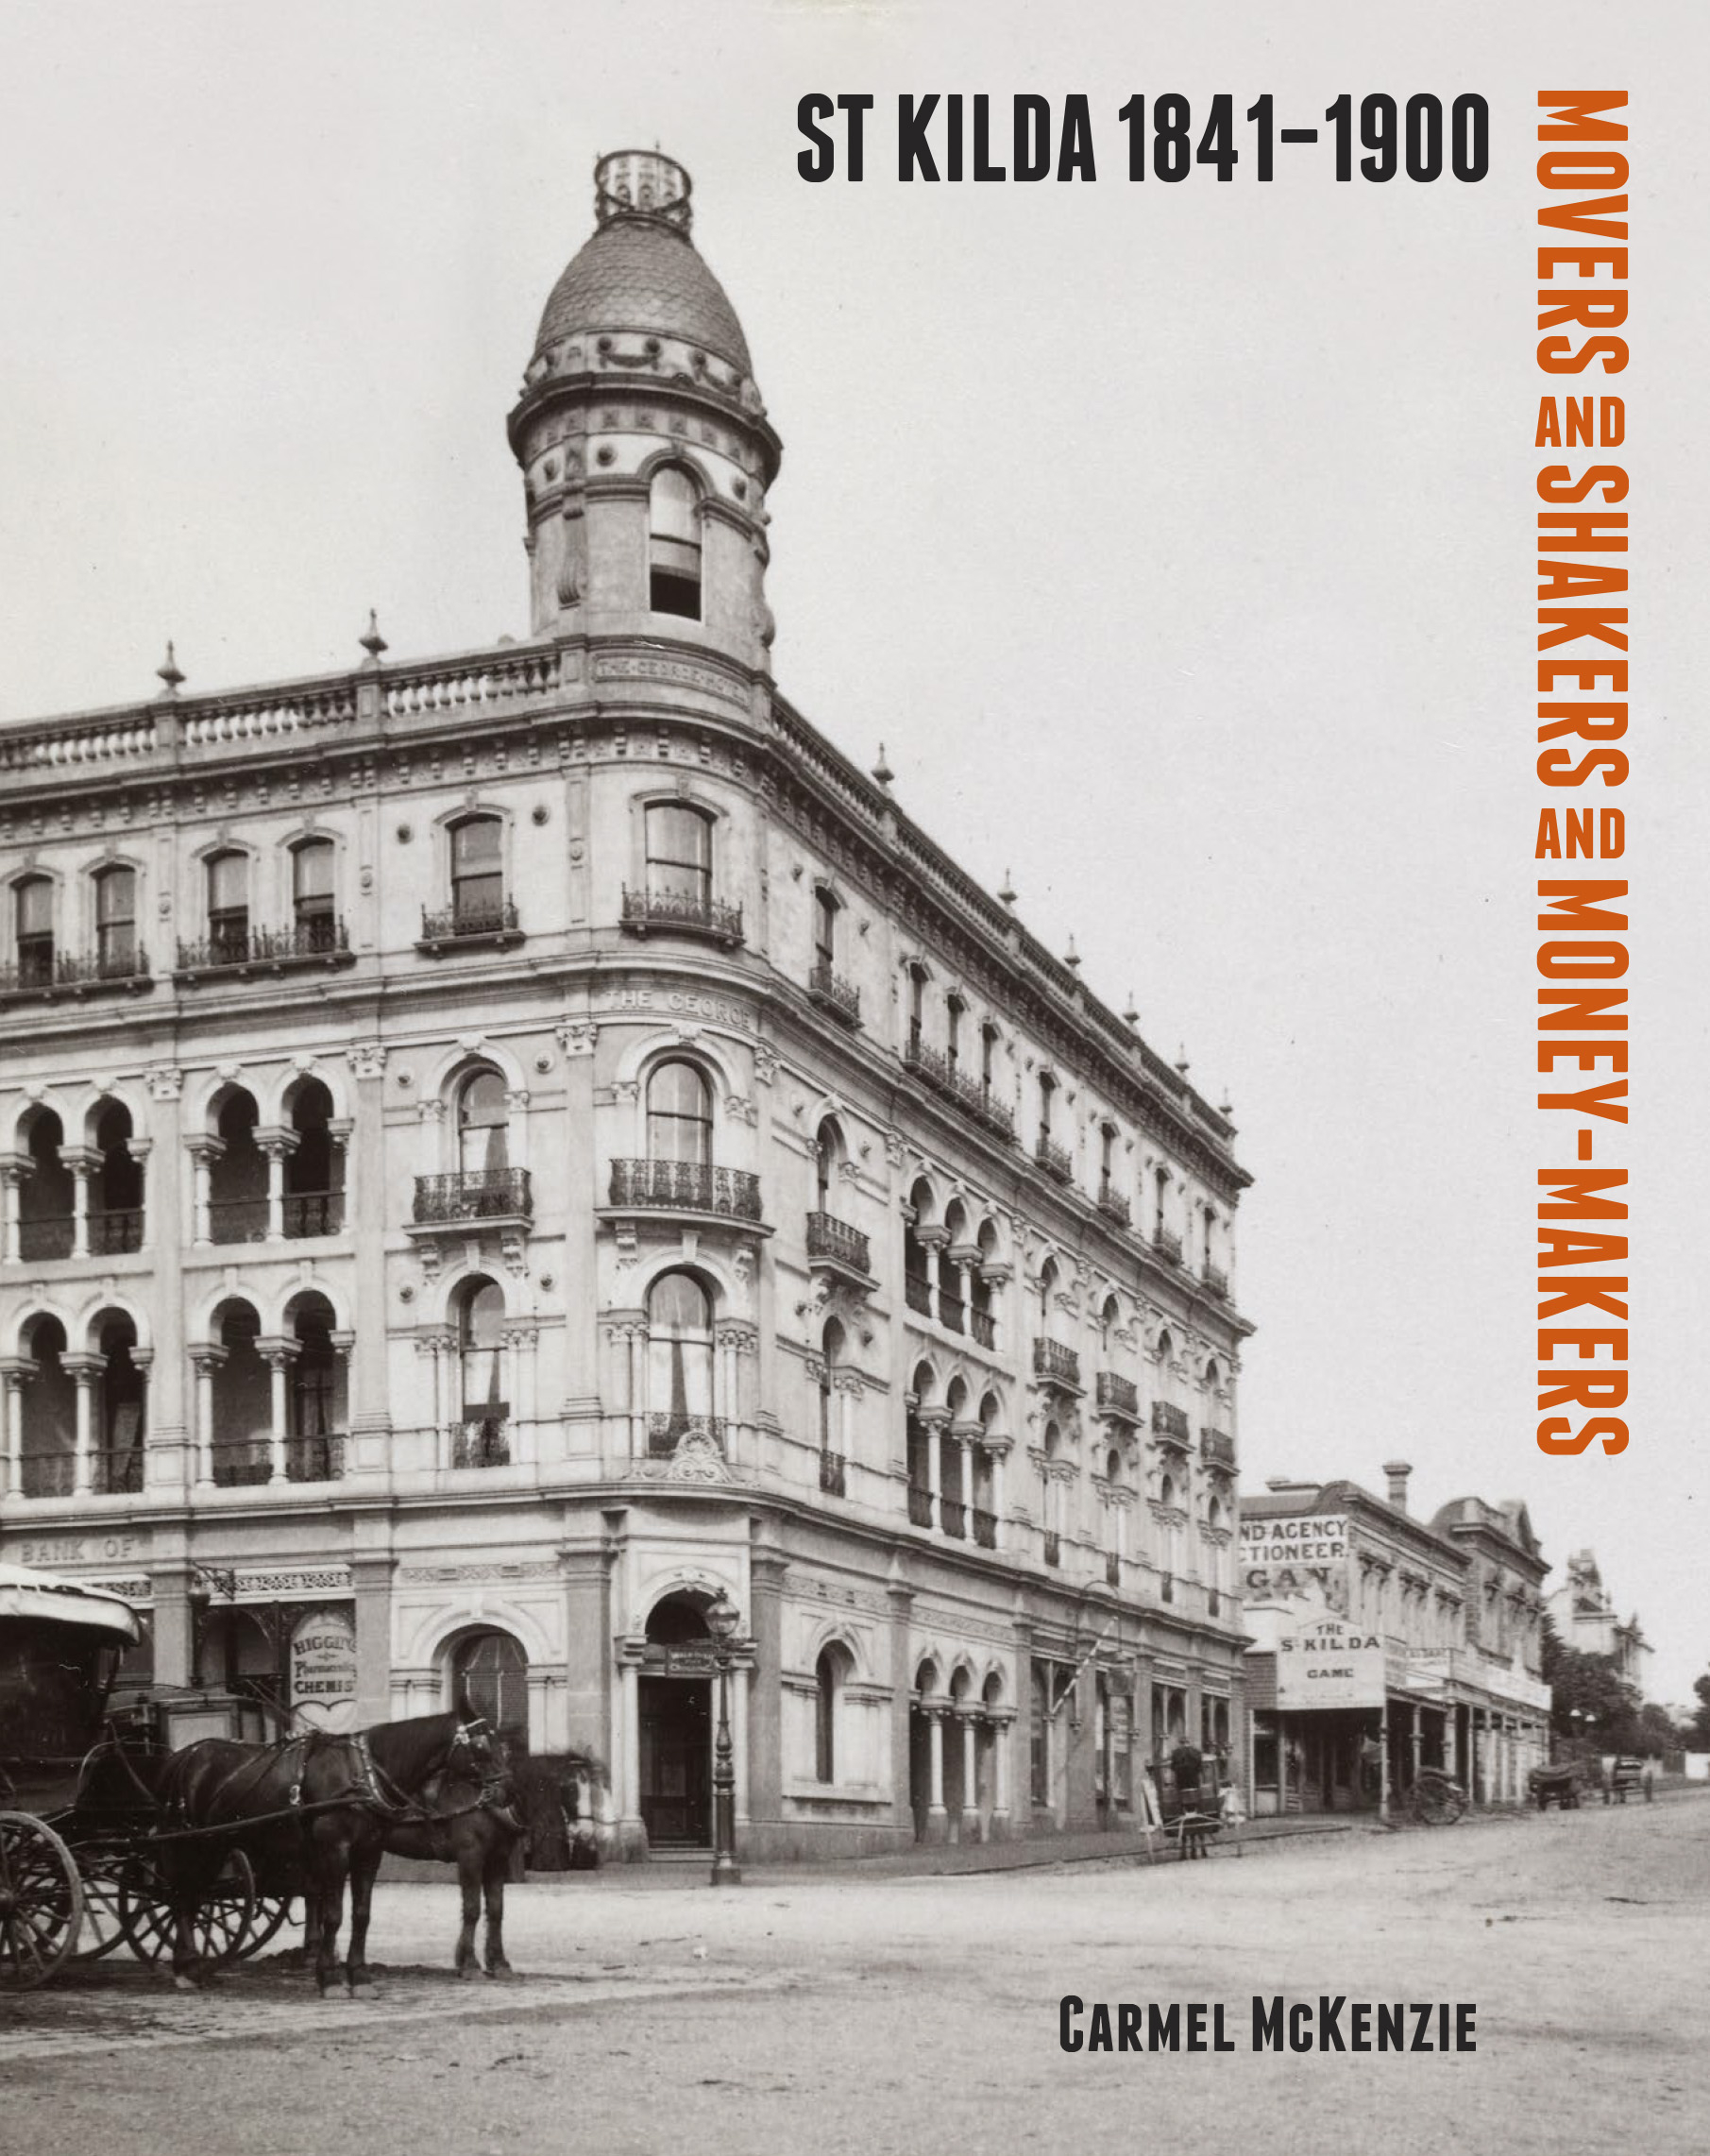 Book's front cover features George Hotel and Grey Street c 1880s